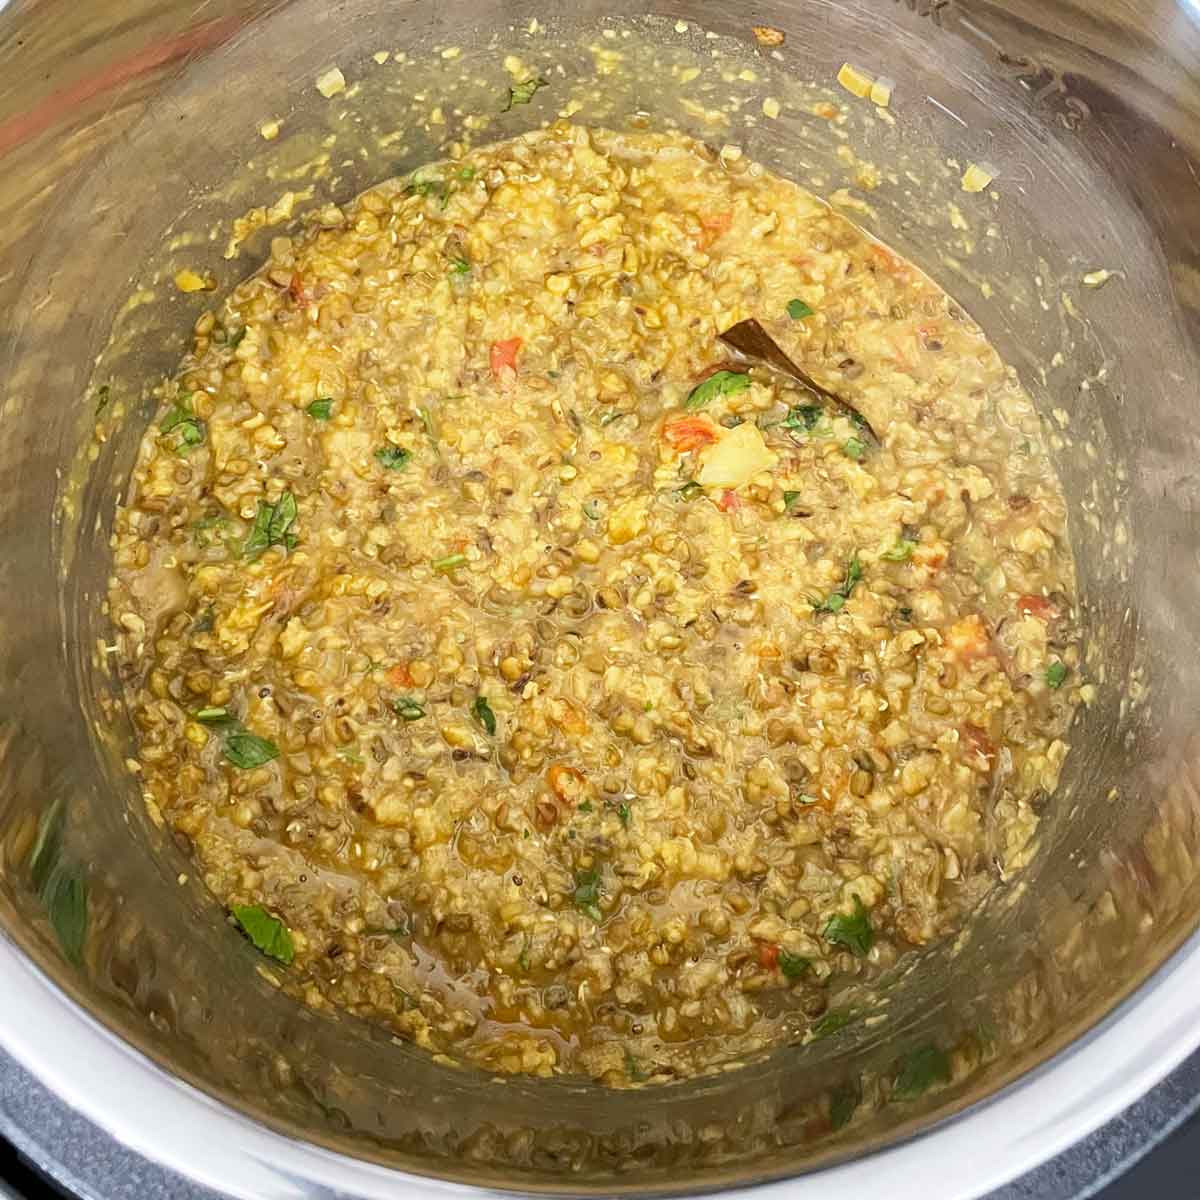 Cooked green moong dal in instant pot.